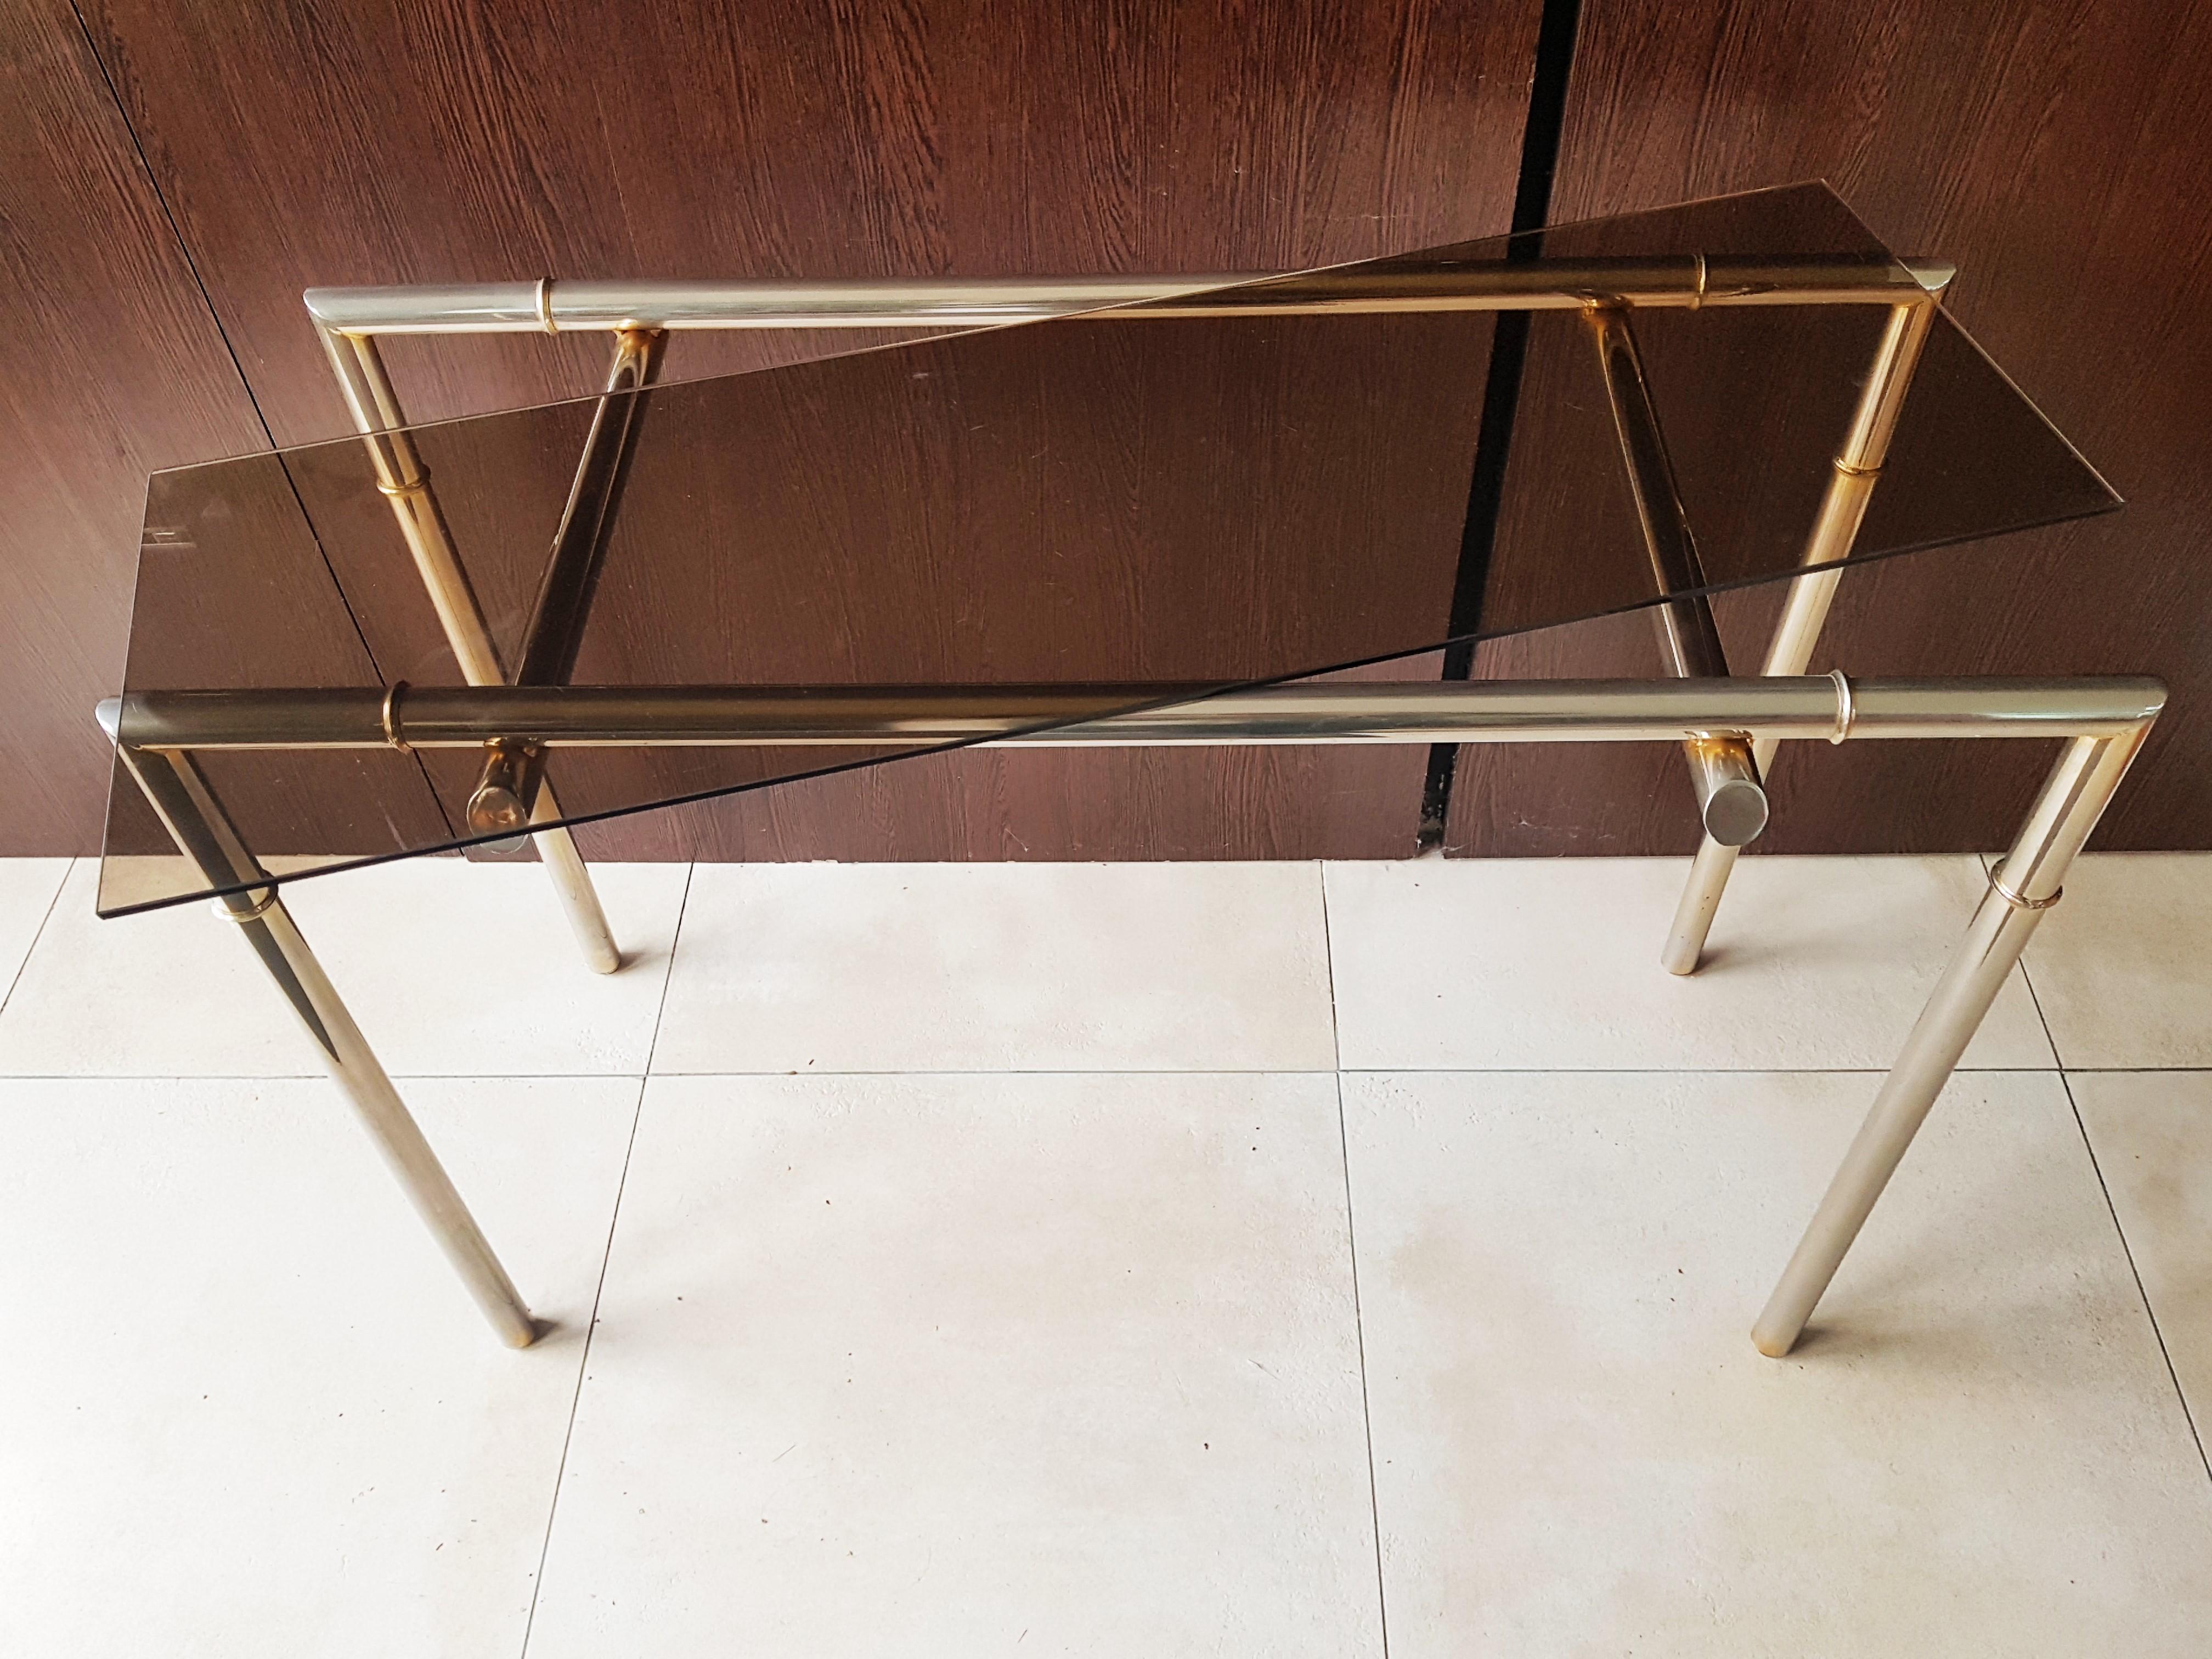 Midcentury console nickel and smoked glass, France, 1960s. Bamboo like tube design. Probably by Maison Jansen.